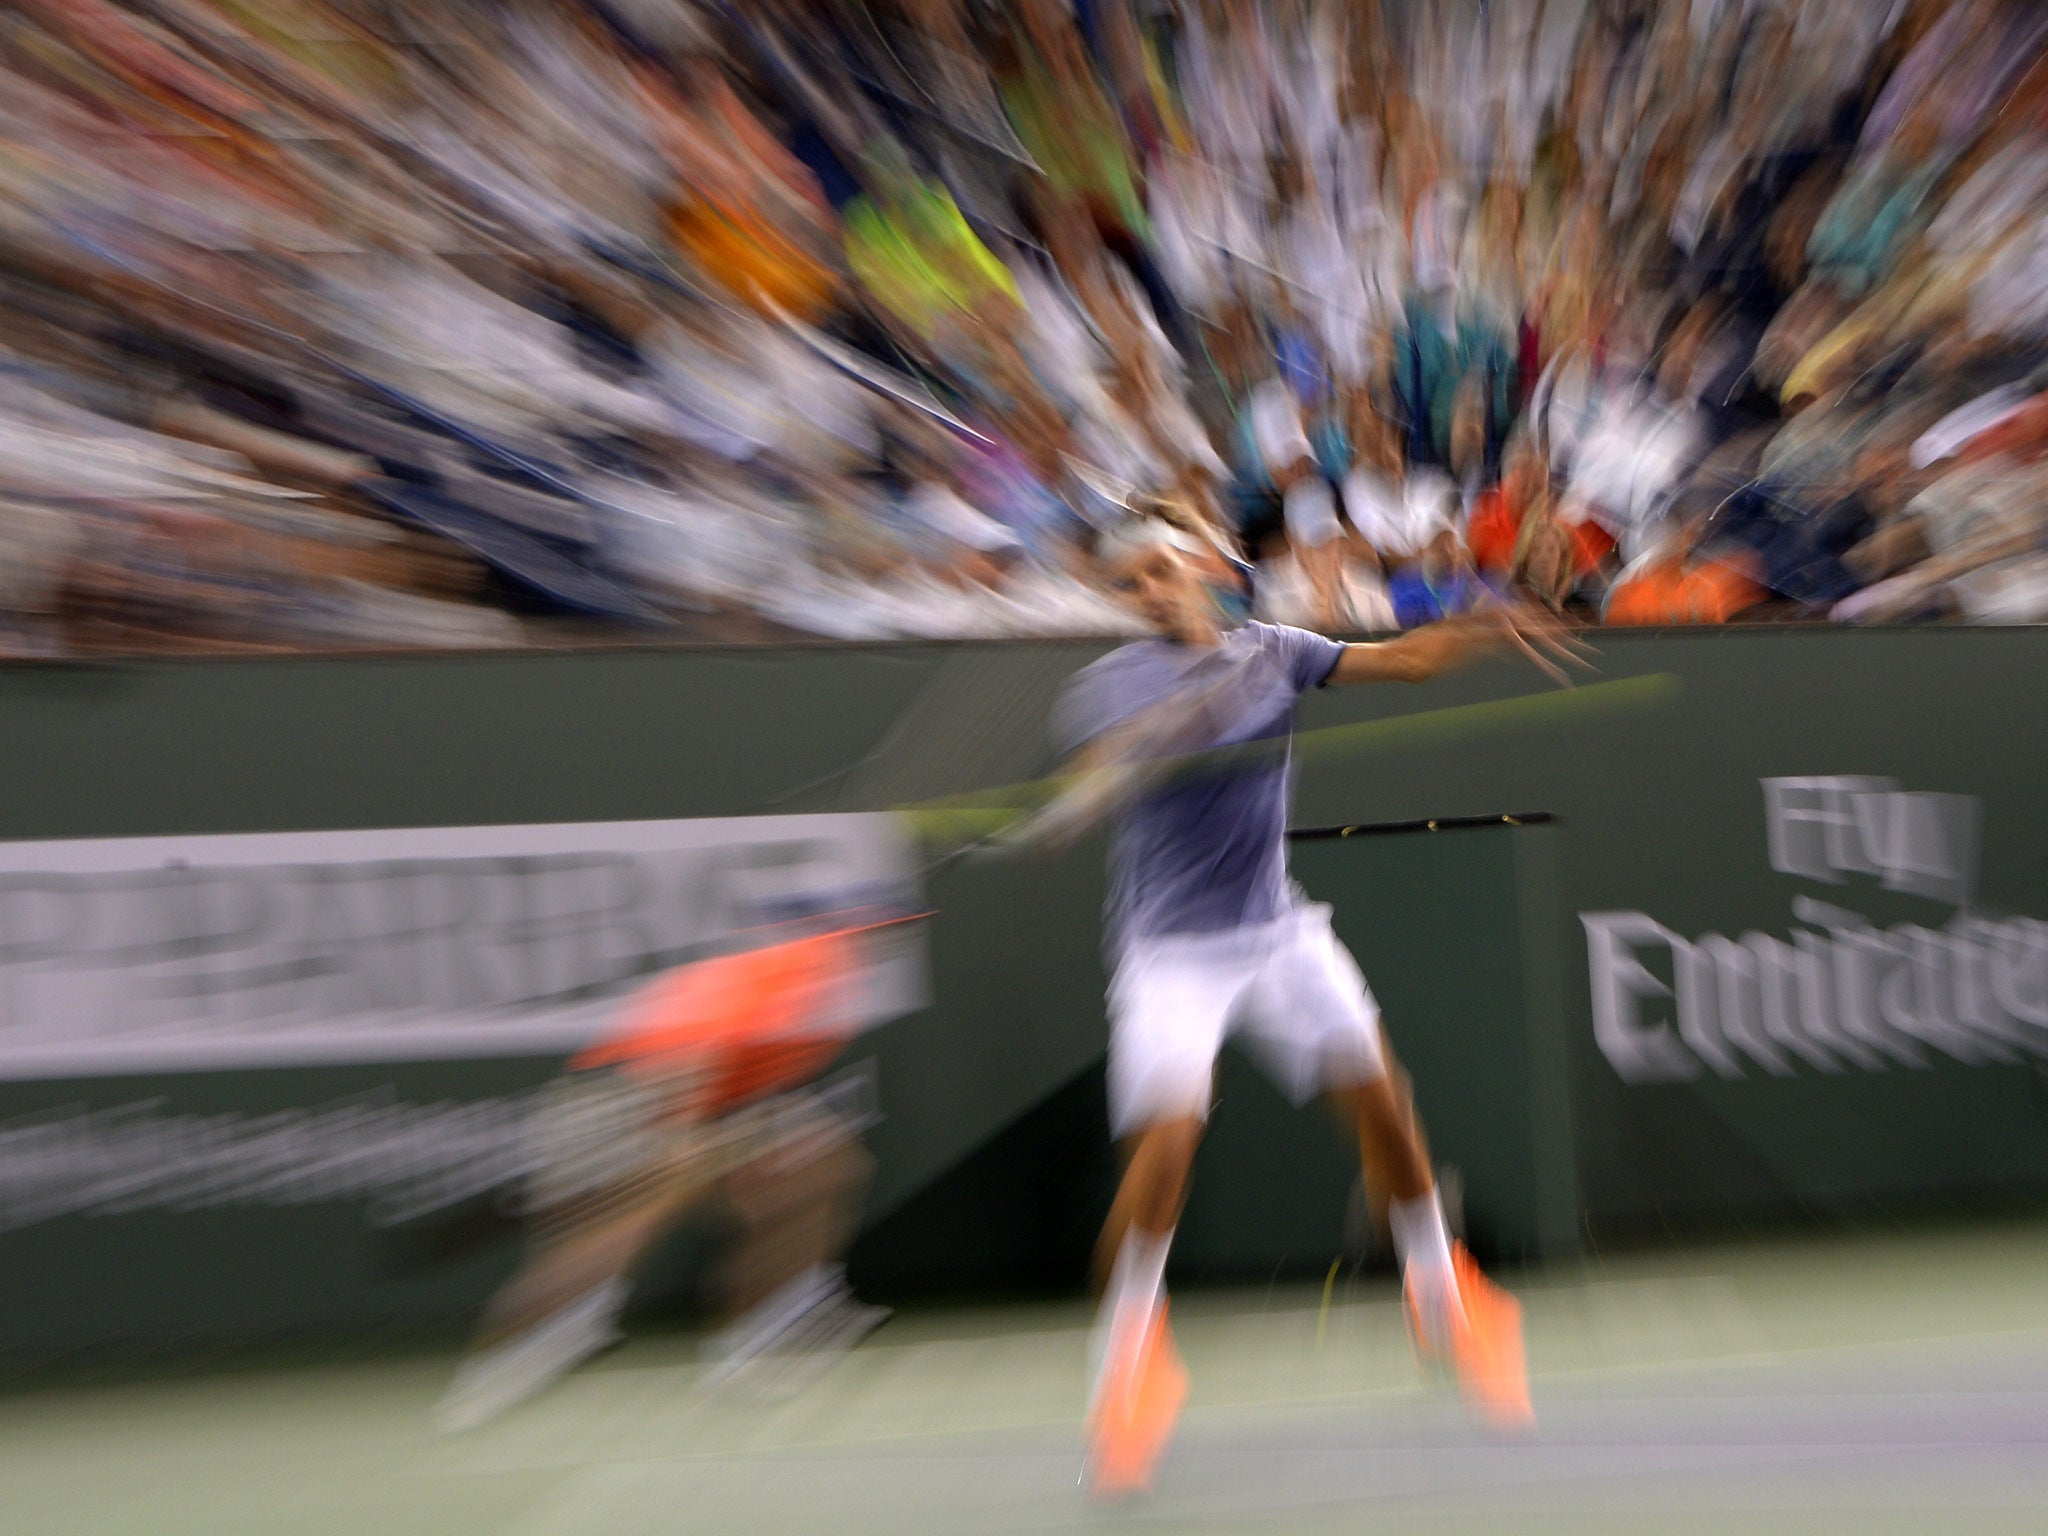 Switzerland's Roger Federer returns against Germany's Tommy Haas during the BNP Paribas Open at Indian Wells